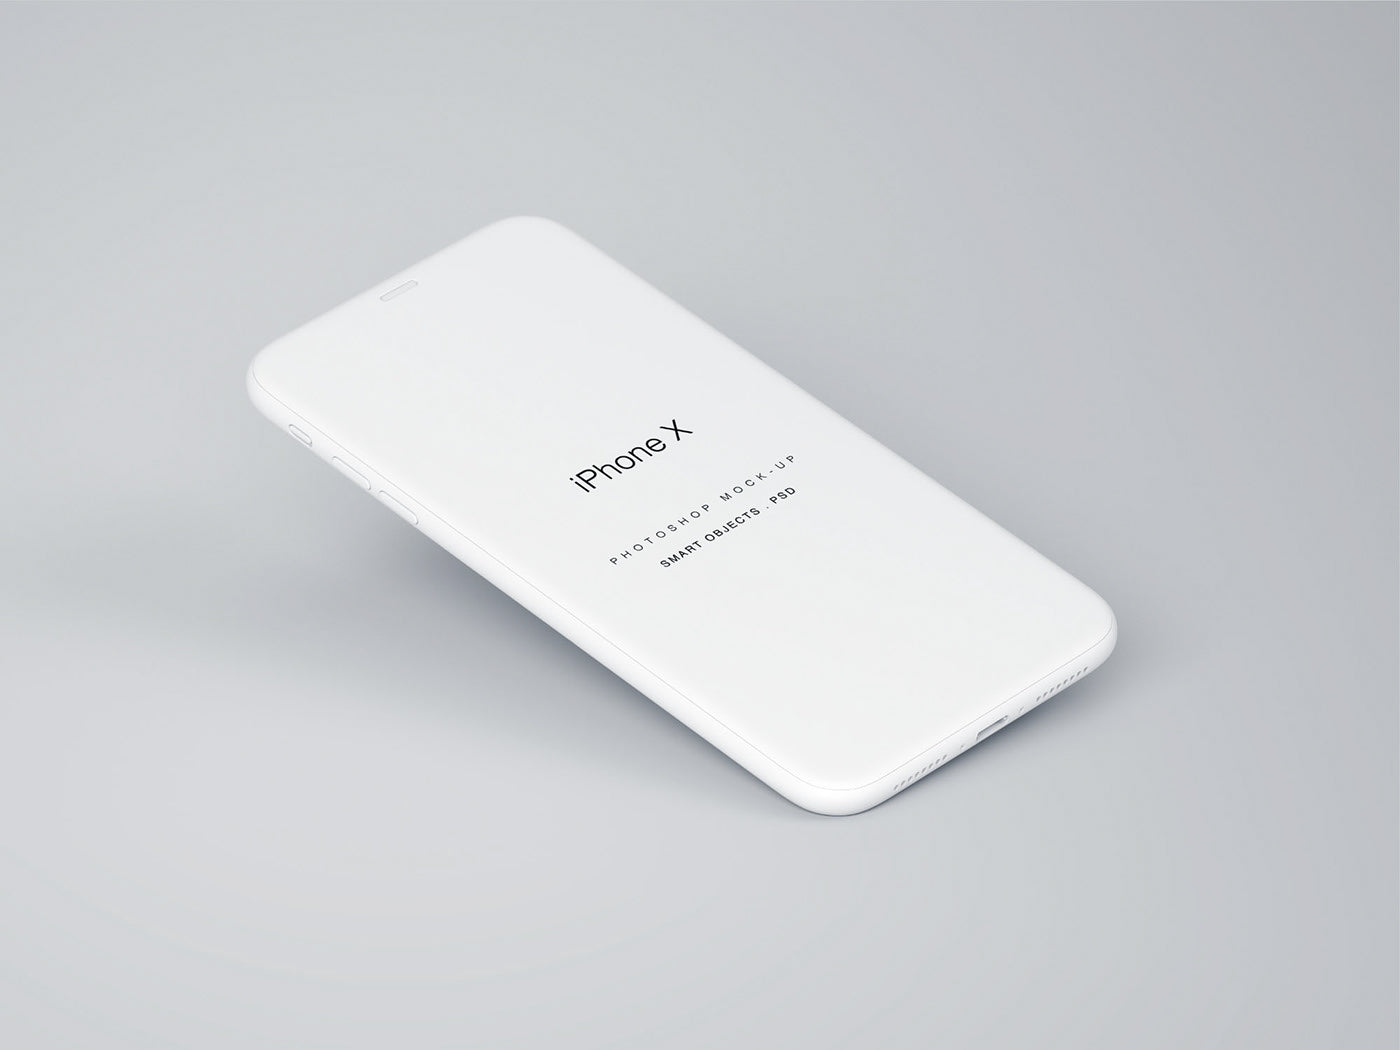 Free Perspective iPhone X Mockup PSD